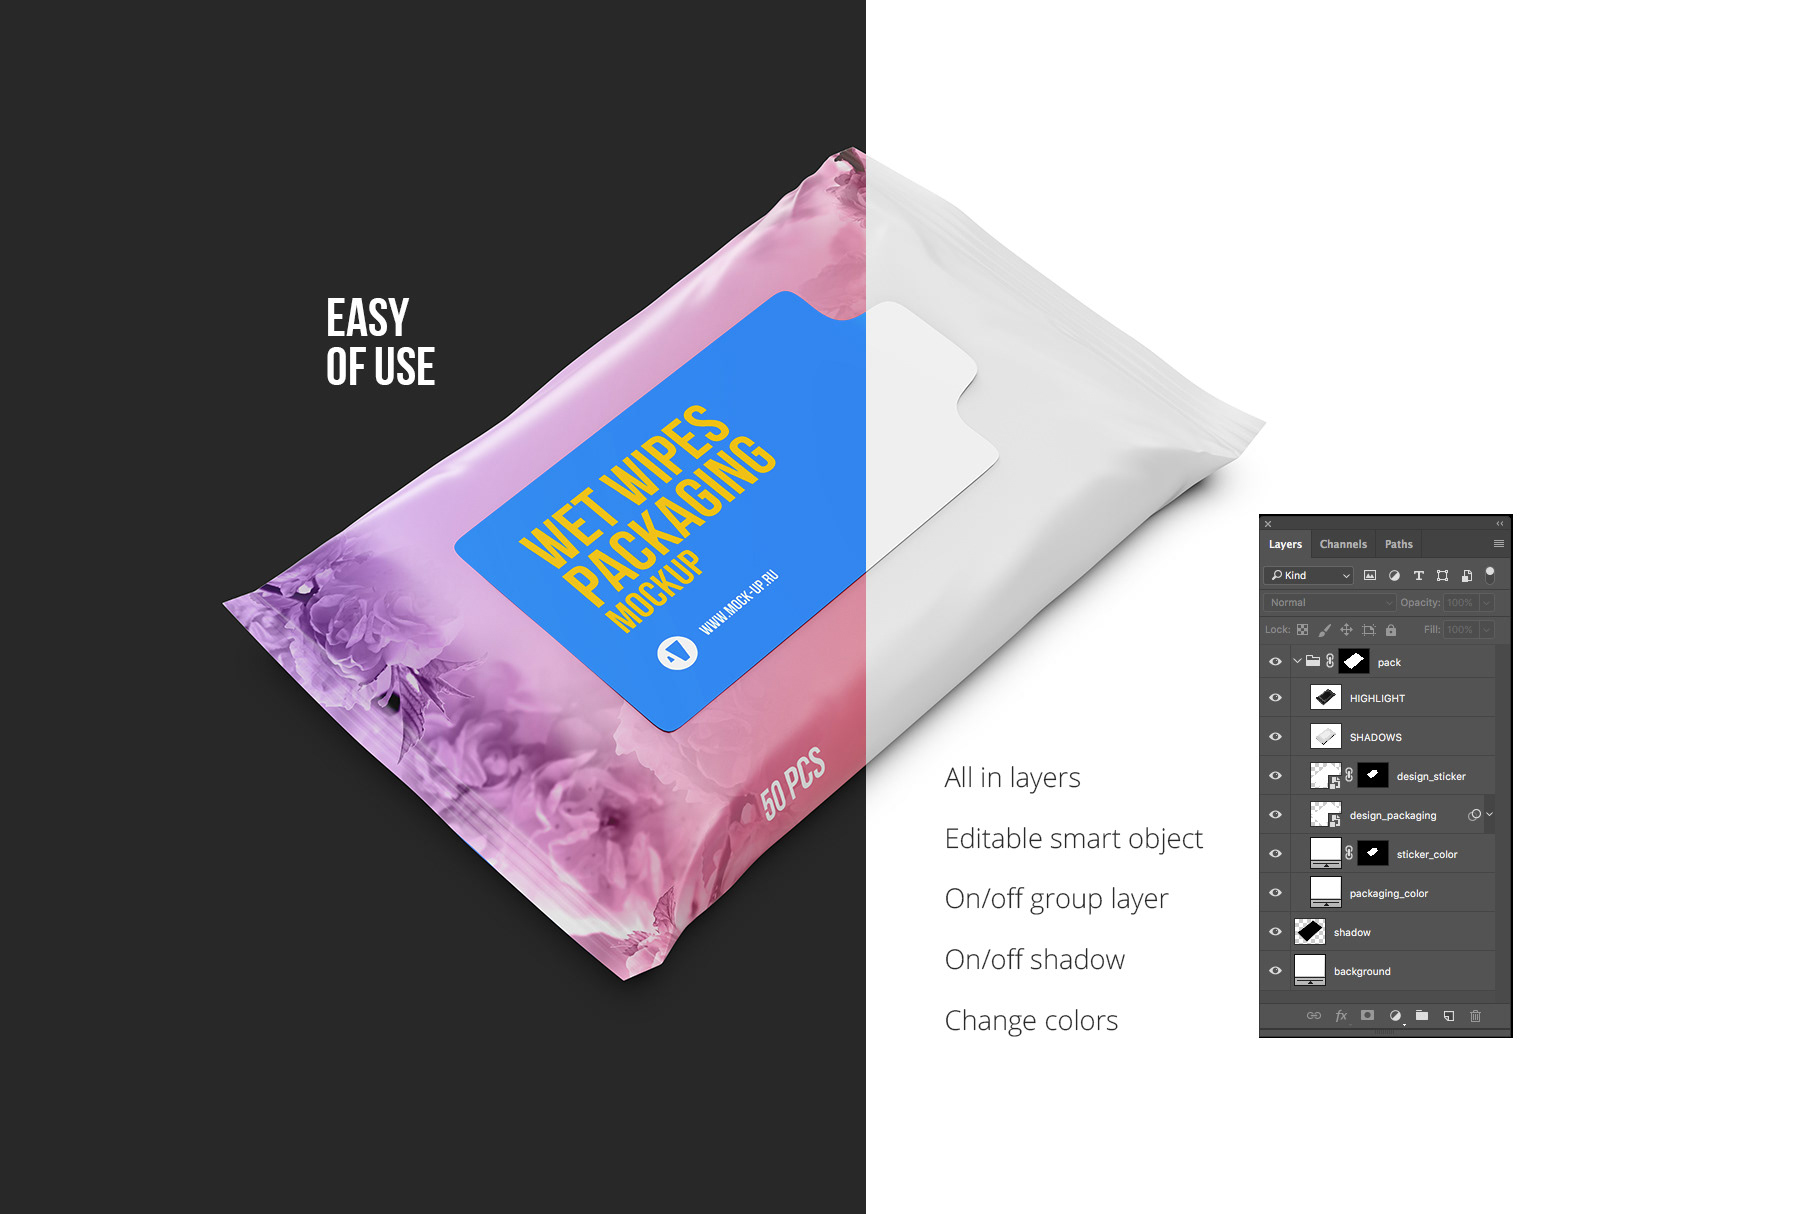 Download Exclusive Product Mockups - Wet Wipes 3/4 view mockup